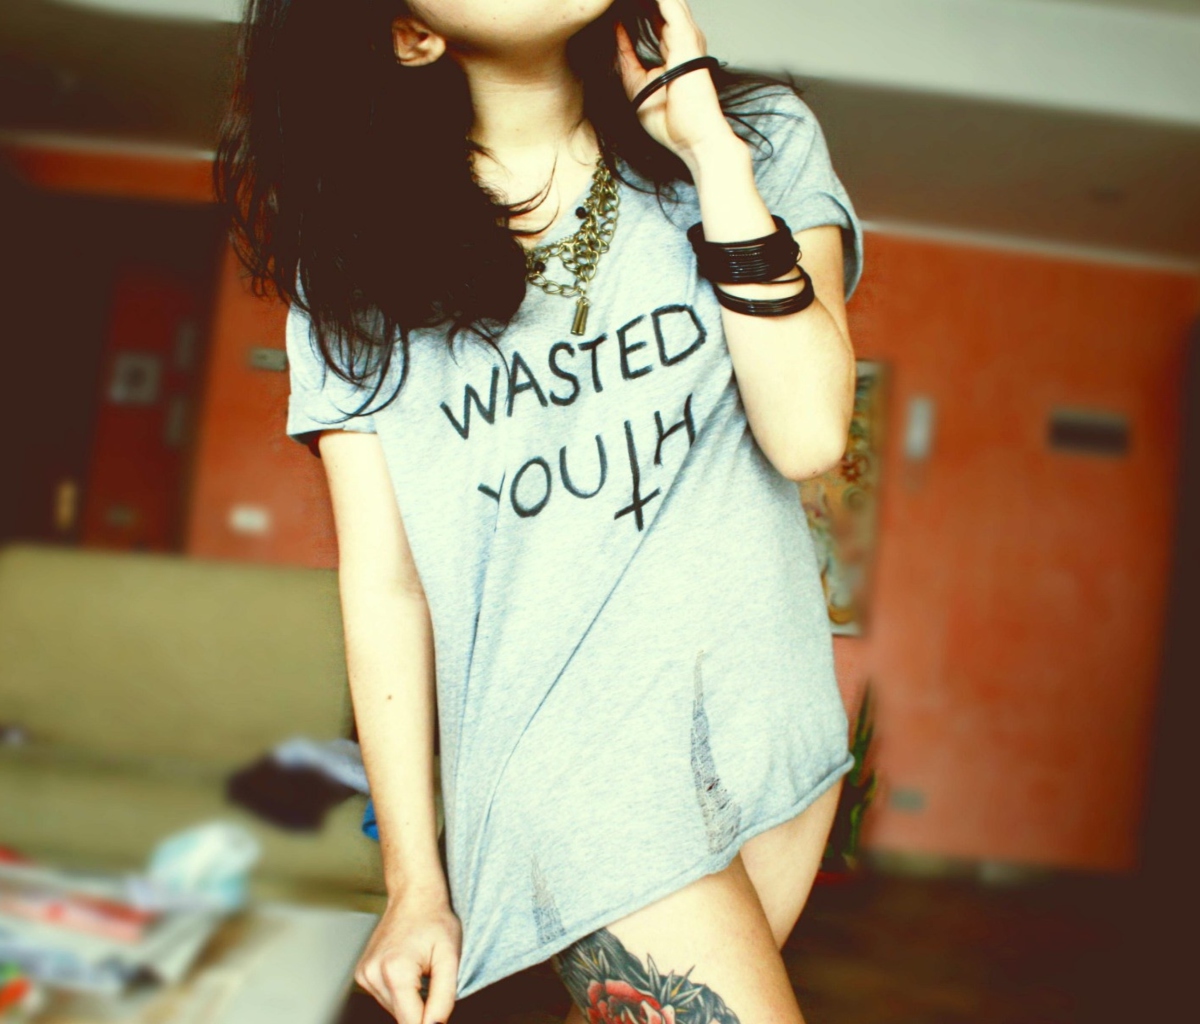 Das Wasted Youth T-Shirt Wallpaper 1200x1024